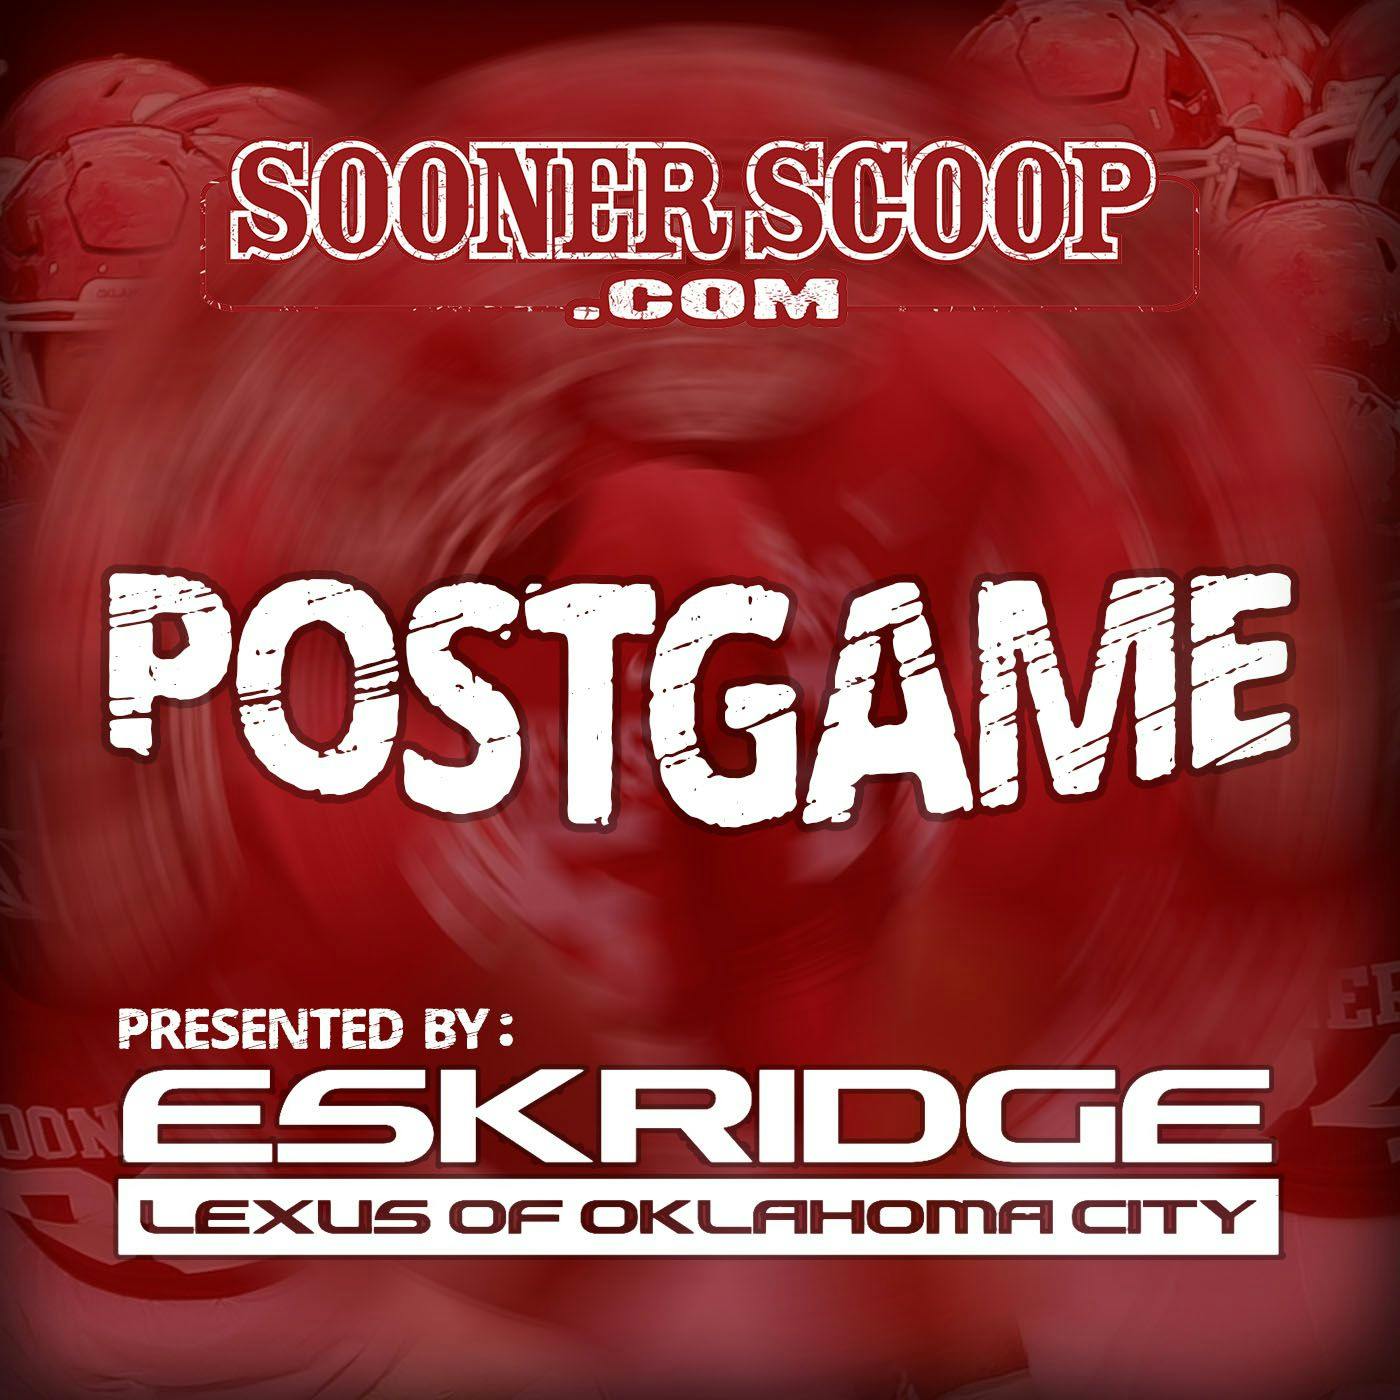 POSTGAME: OU wins 16-13, but tonight will always be Rattler's boo bird game